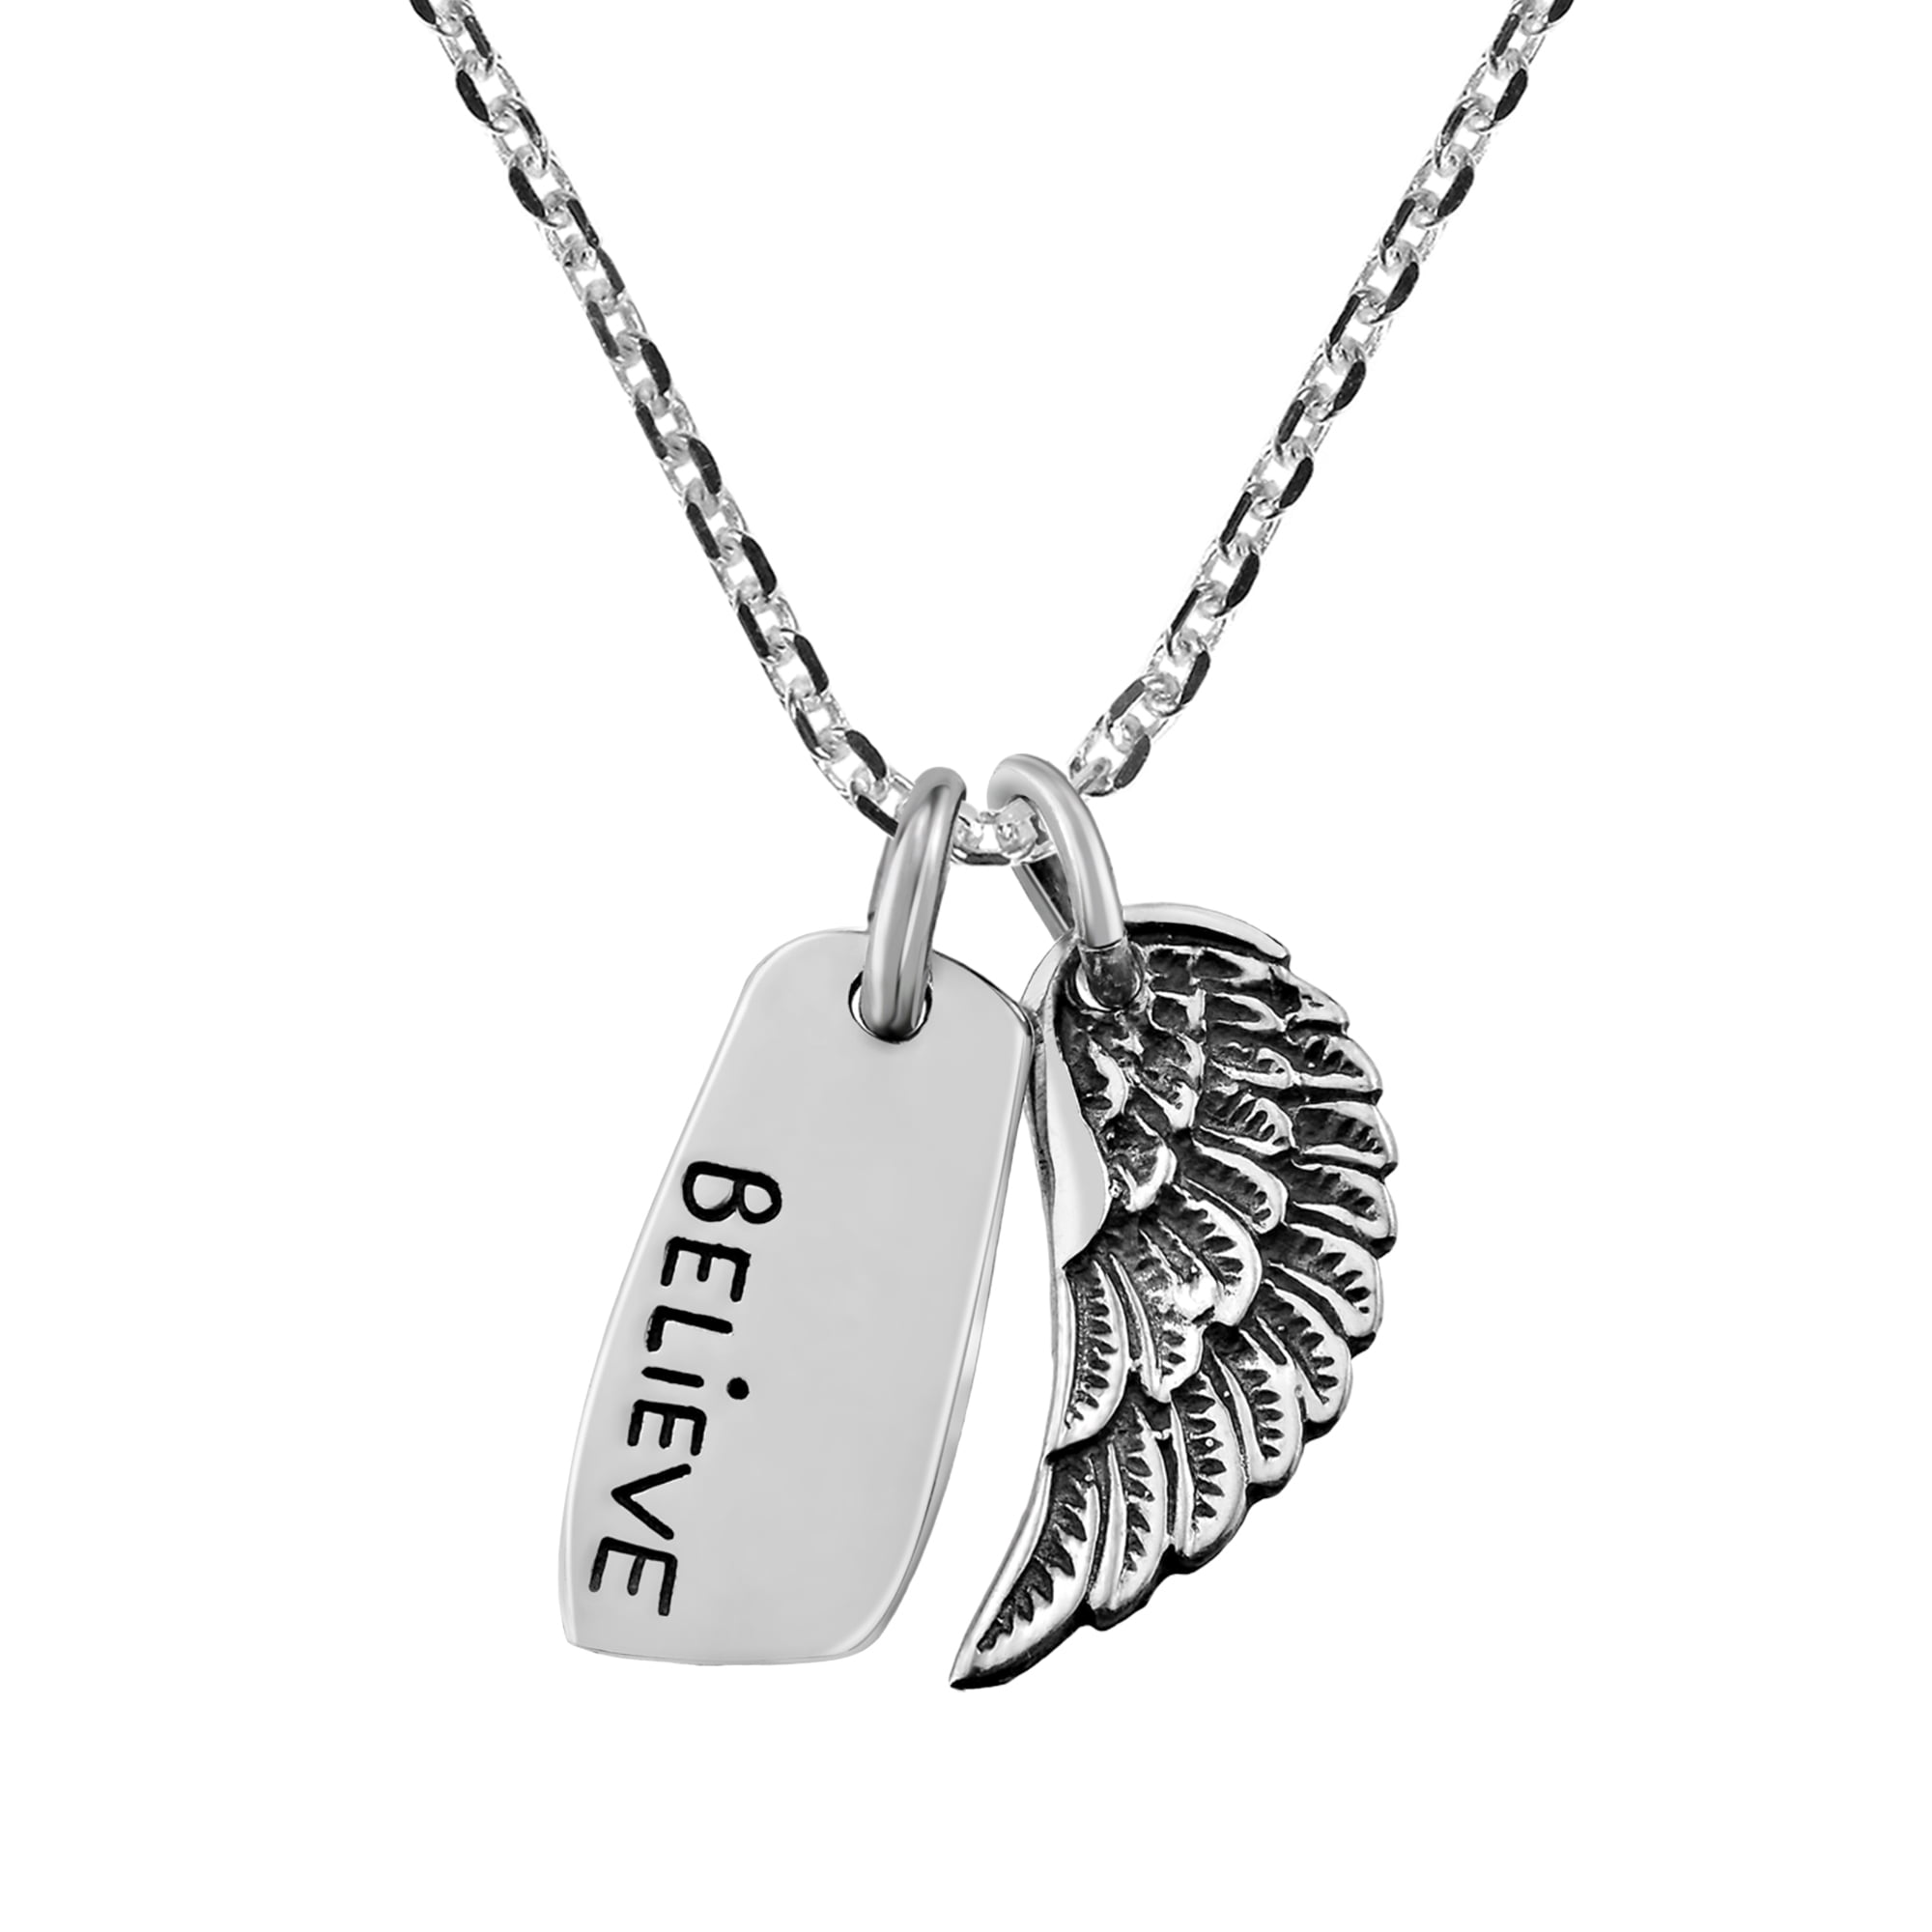 Uplifting Believe and Angel Wing .925 Sterling Silver Pendant Necklace